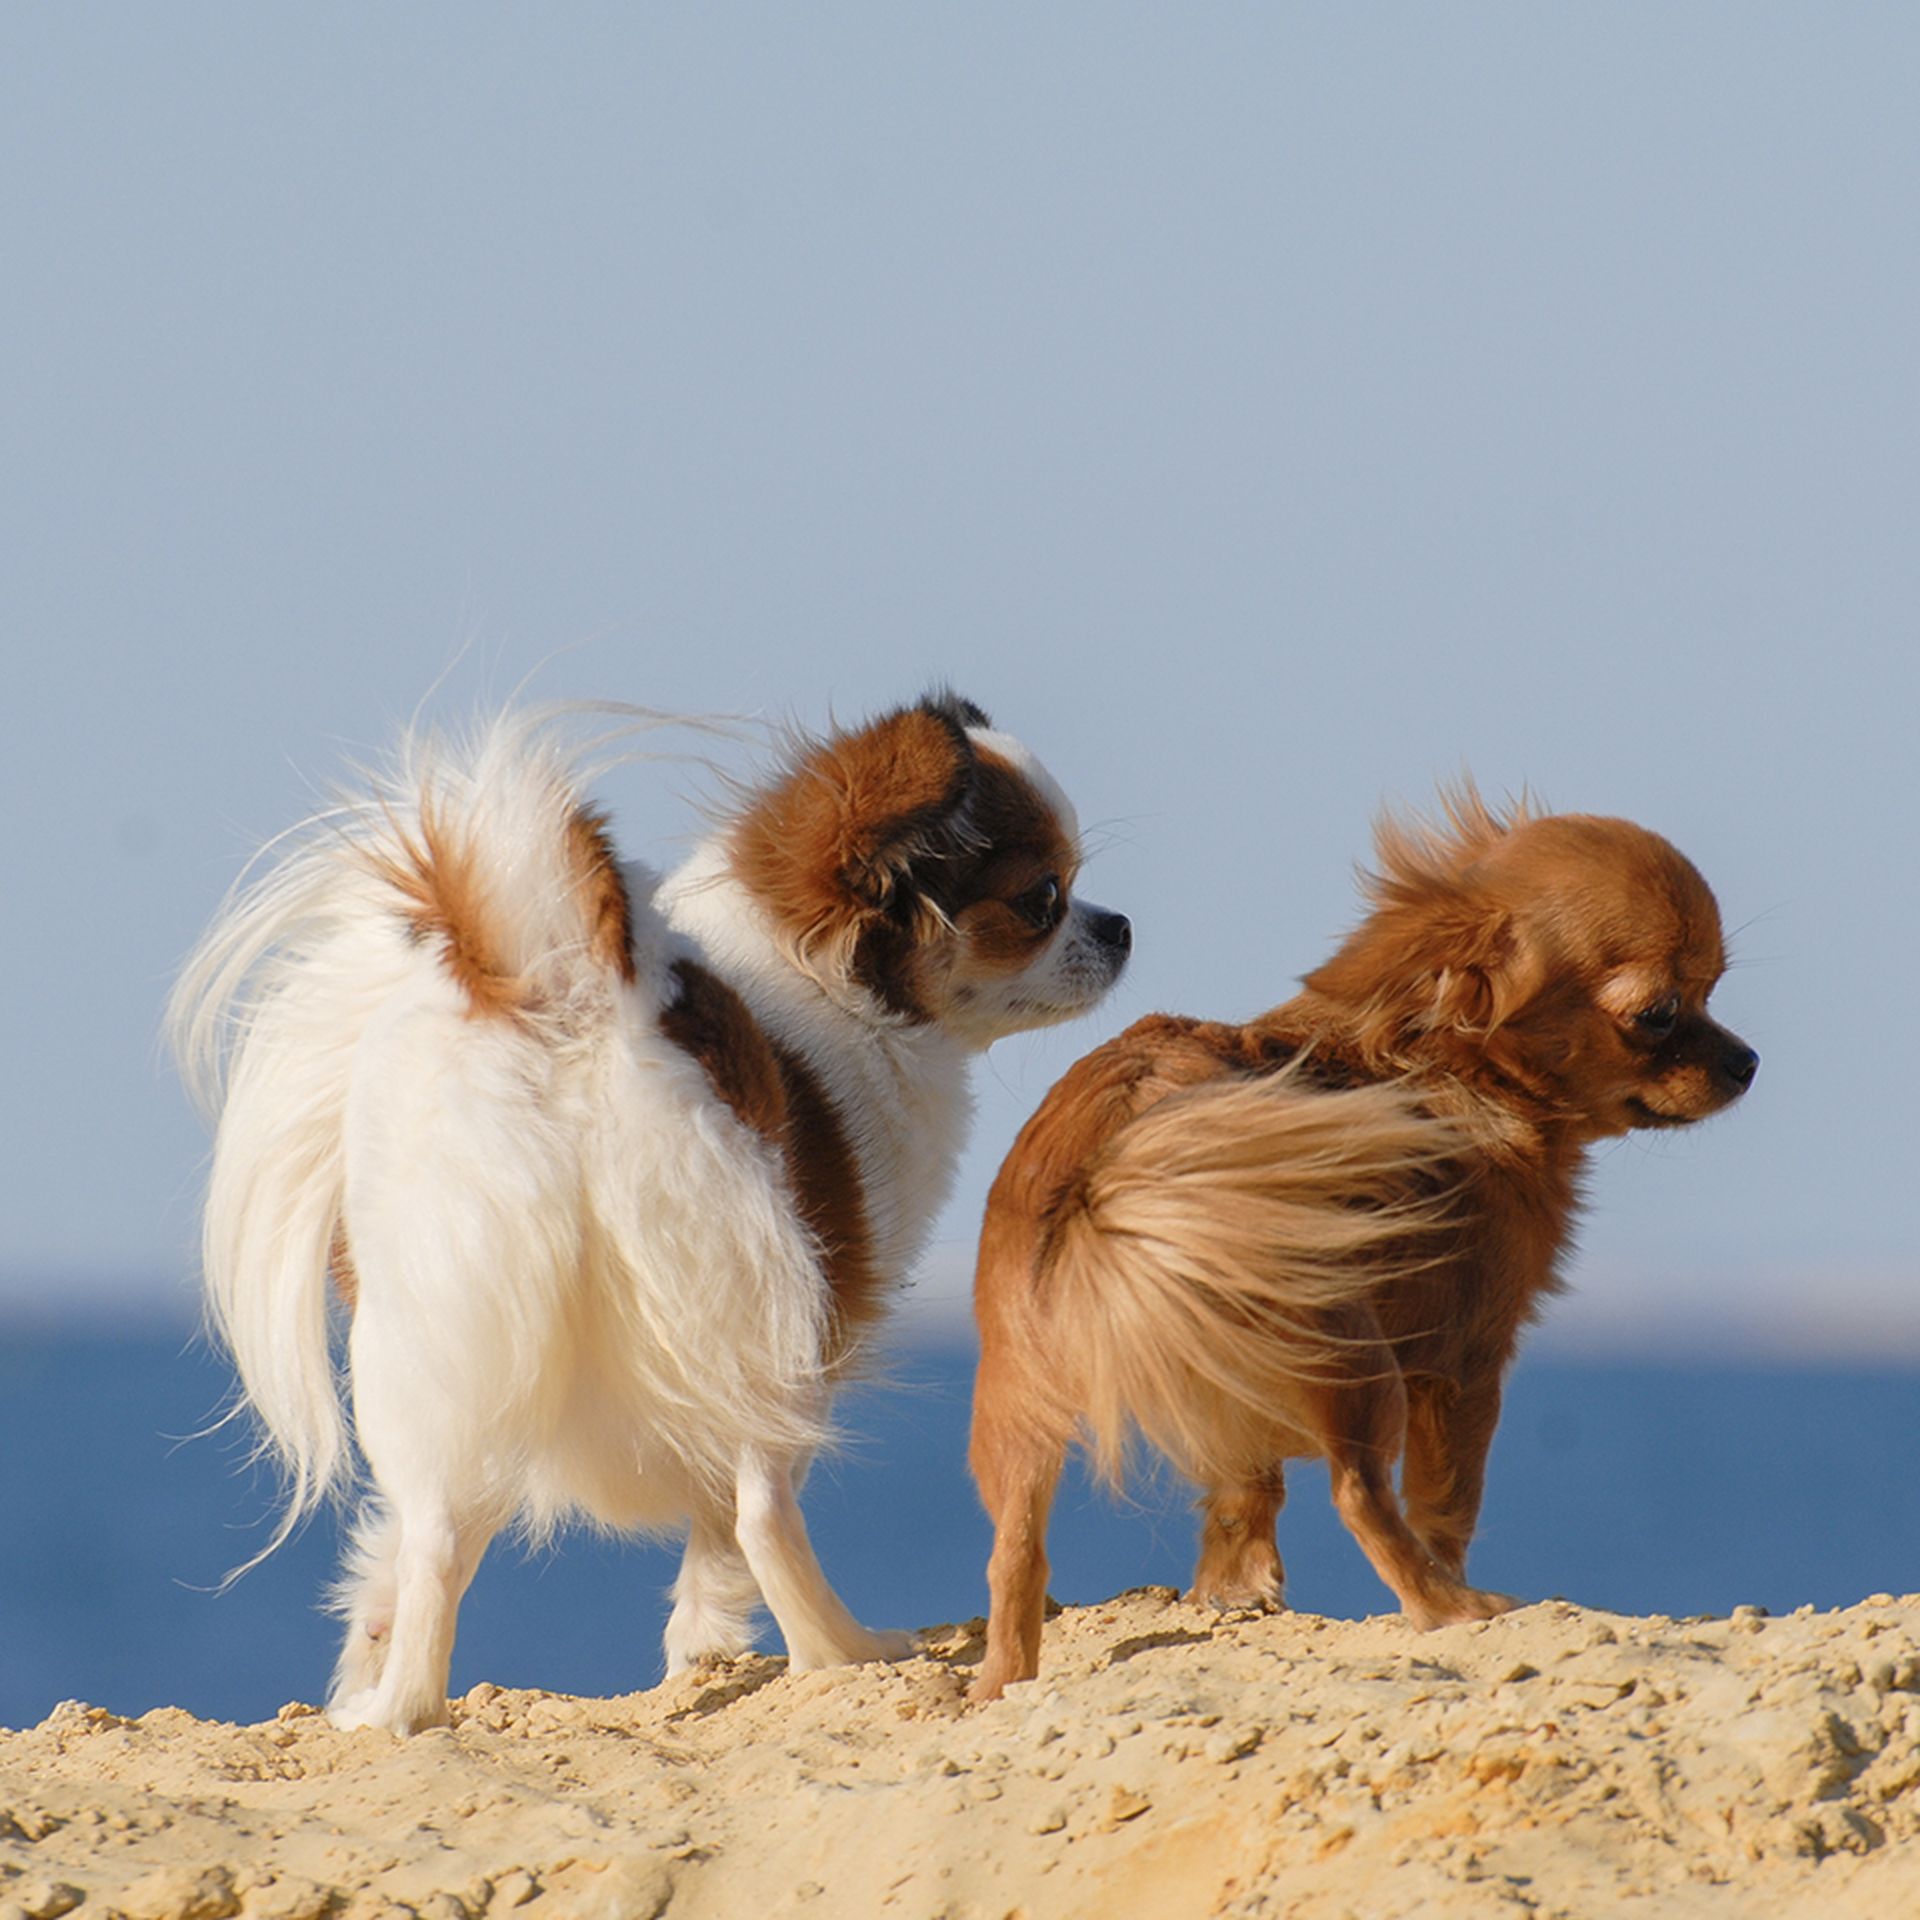 Two chihuahuas at a beach, standing on sand and looking to the right.